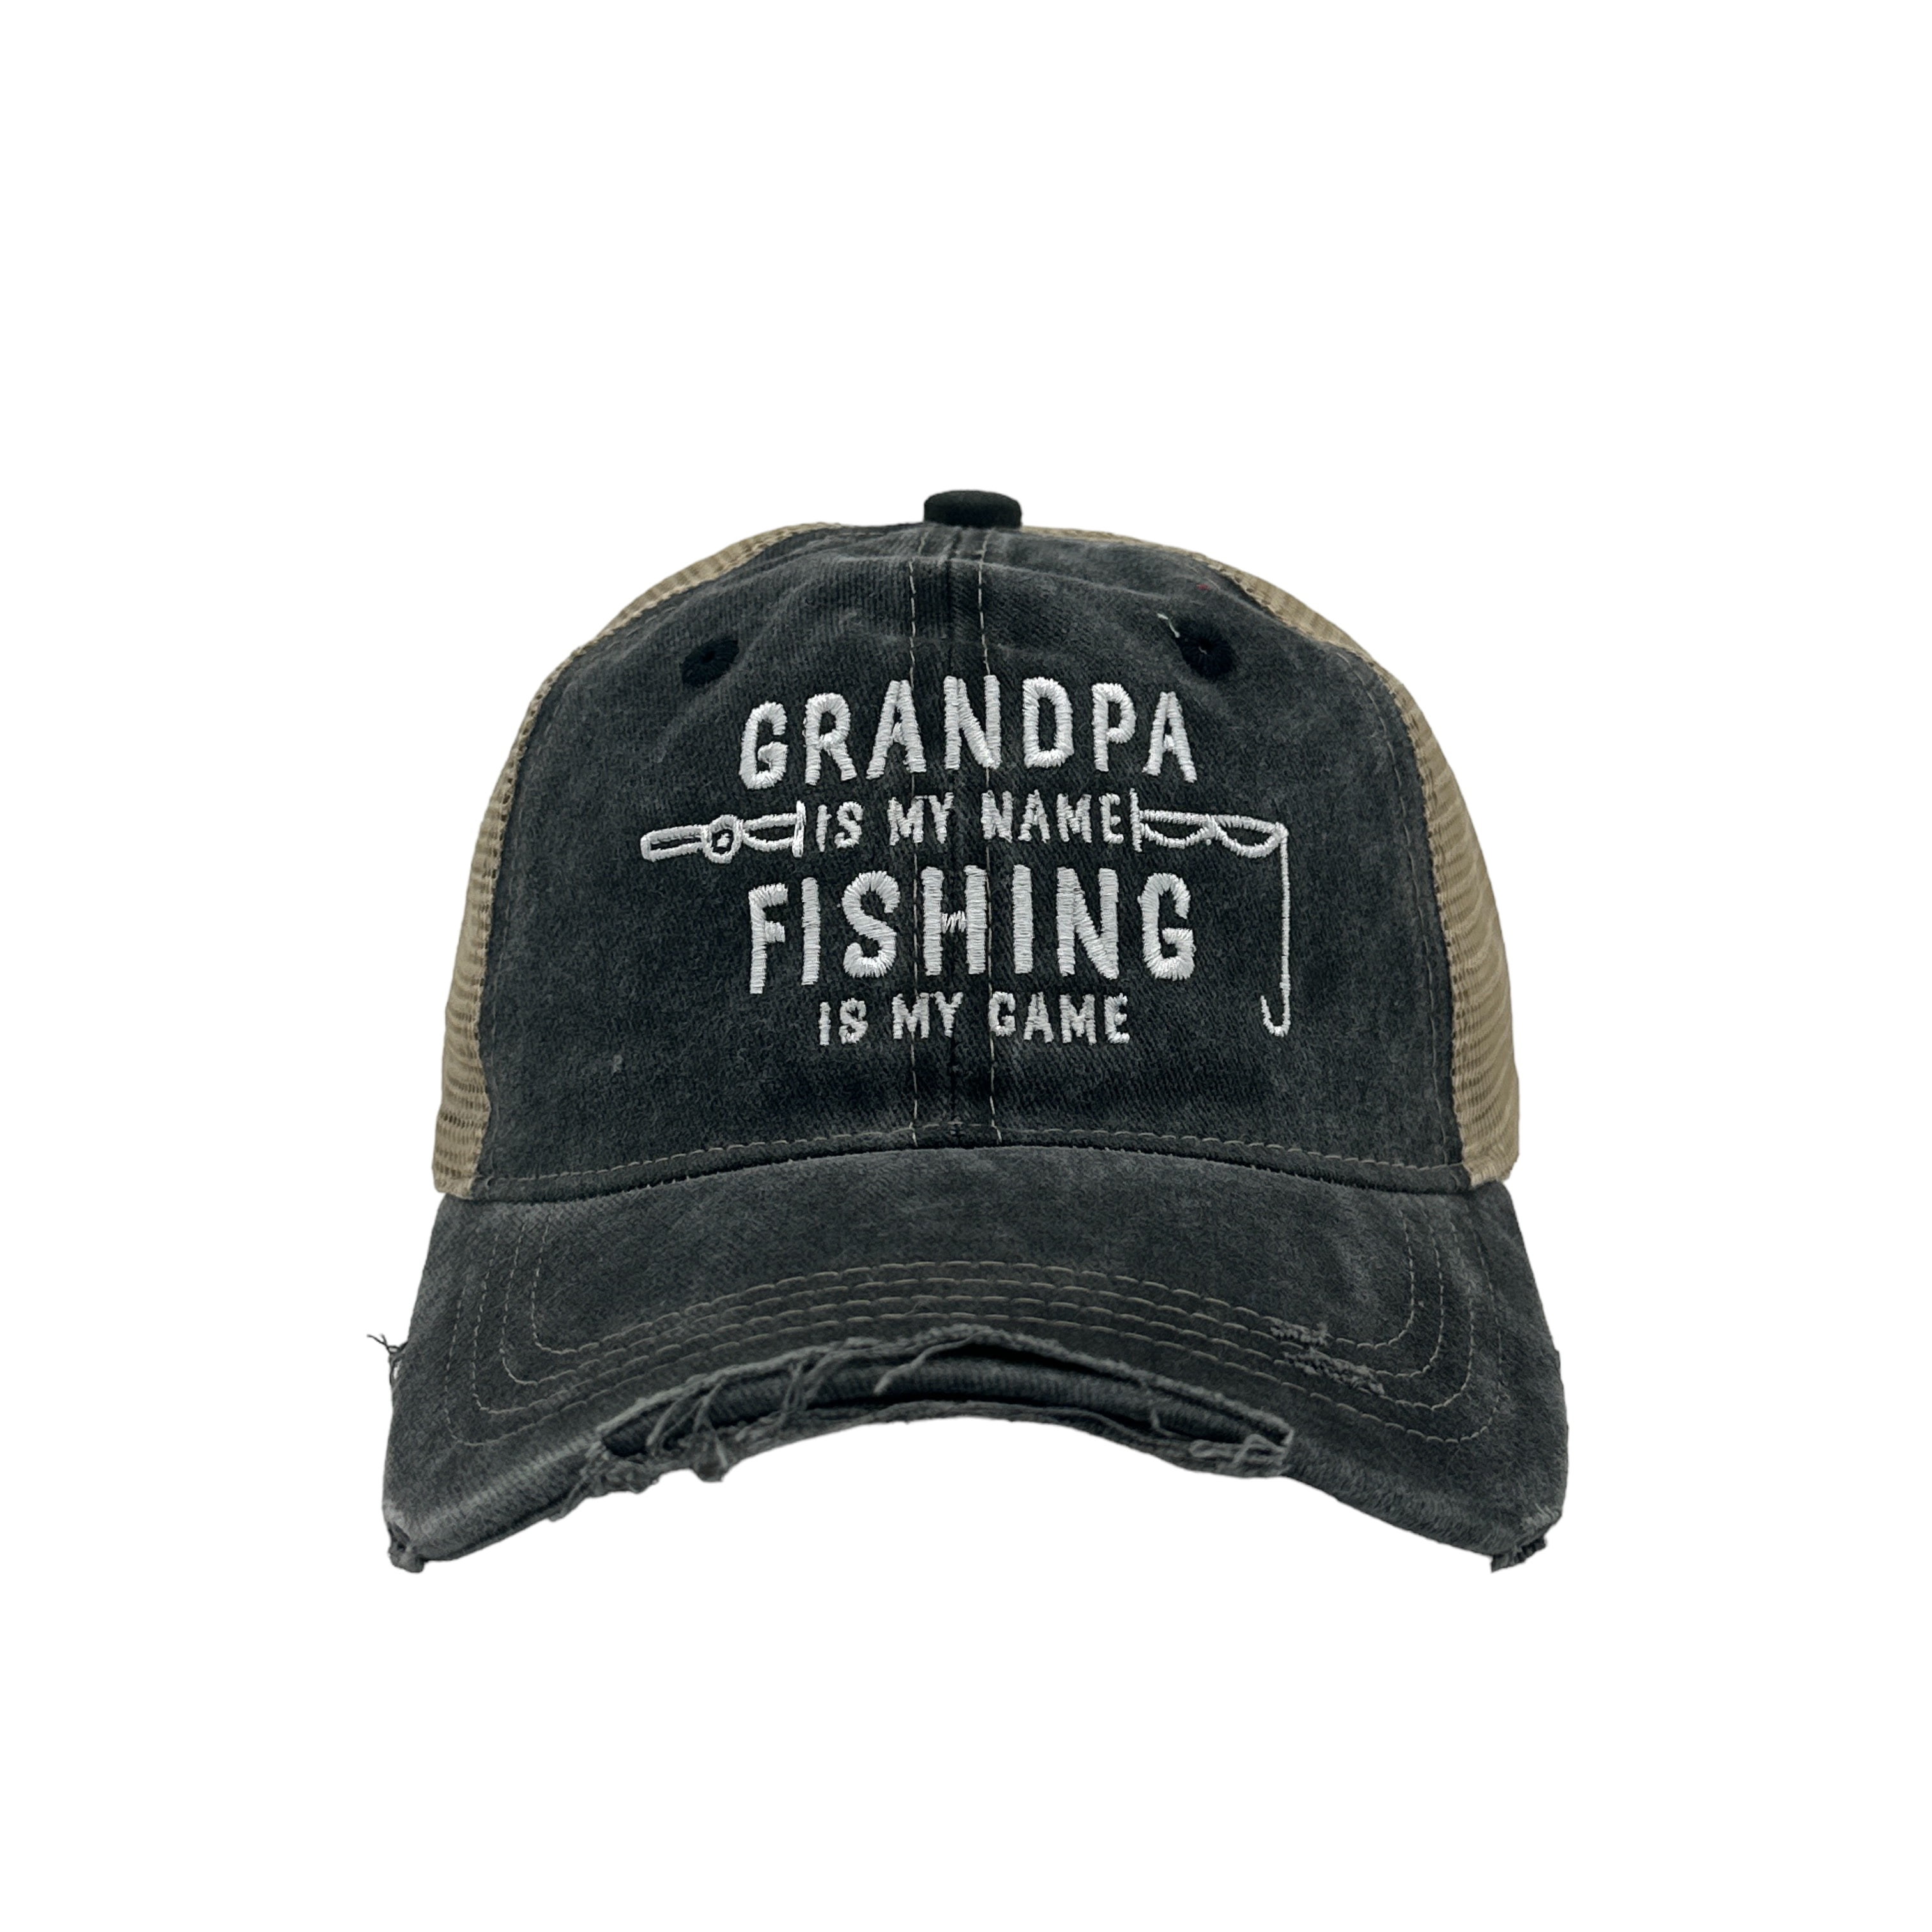 Here Fishy Fishy Fishy Hat Funny Outdoor Fishing Lovers Cap 